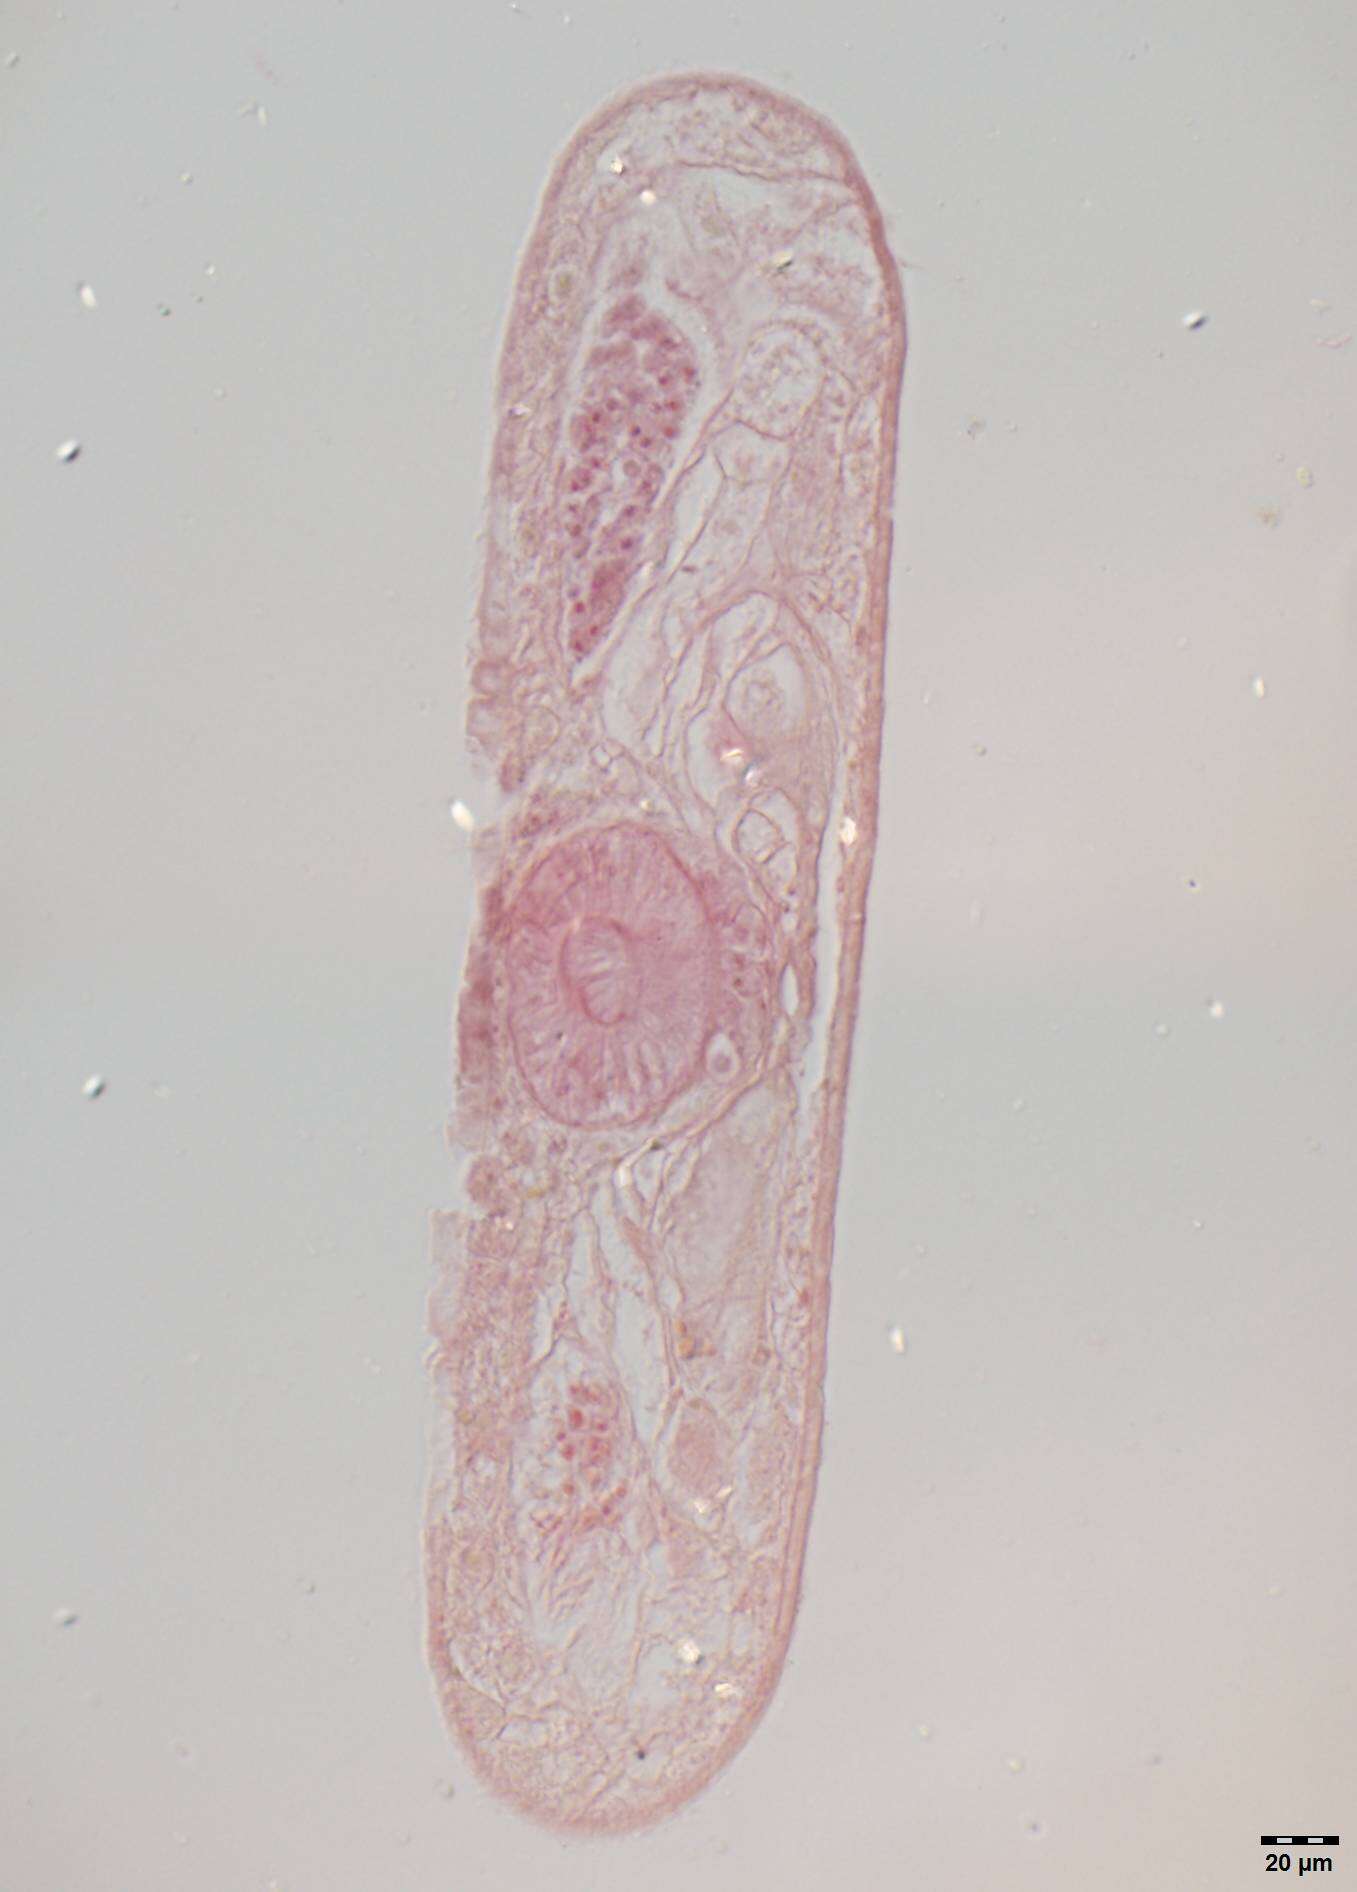 Image of Syndesmis